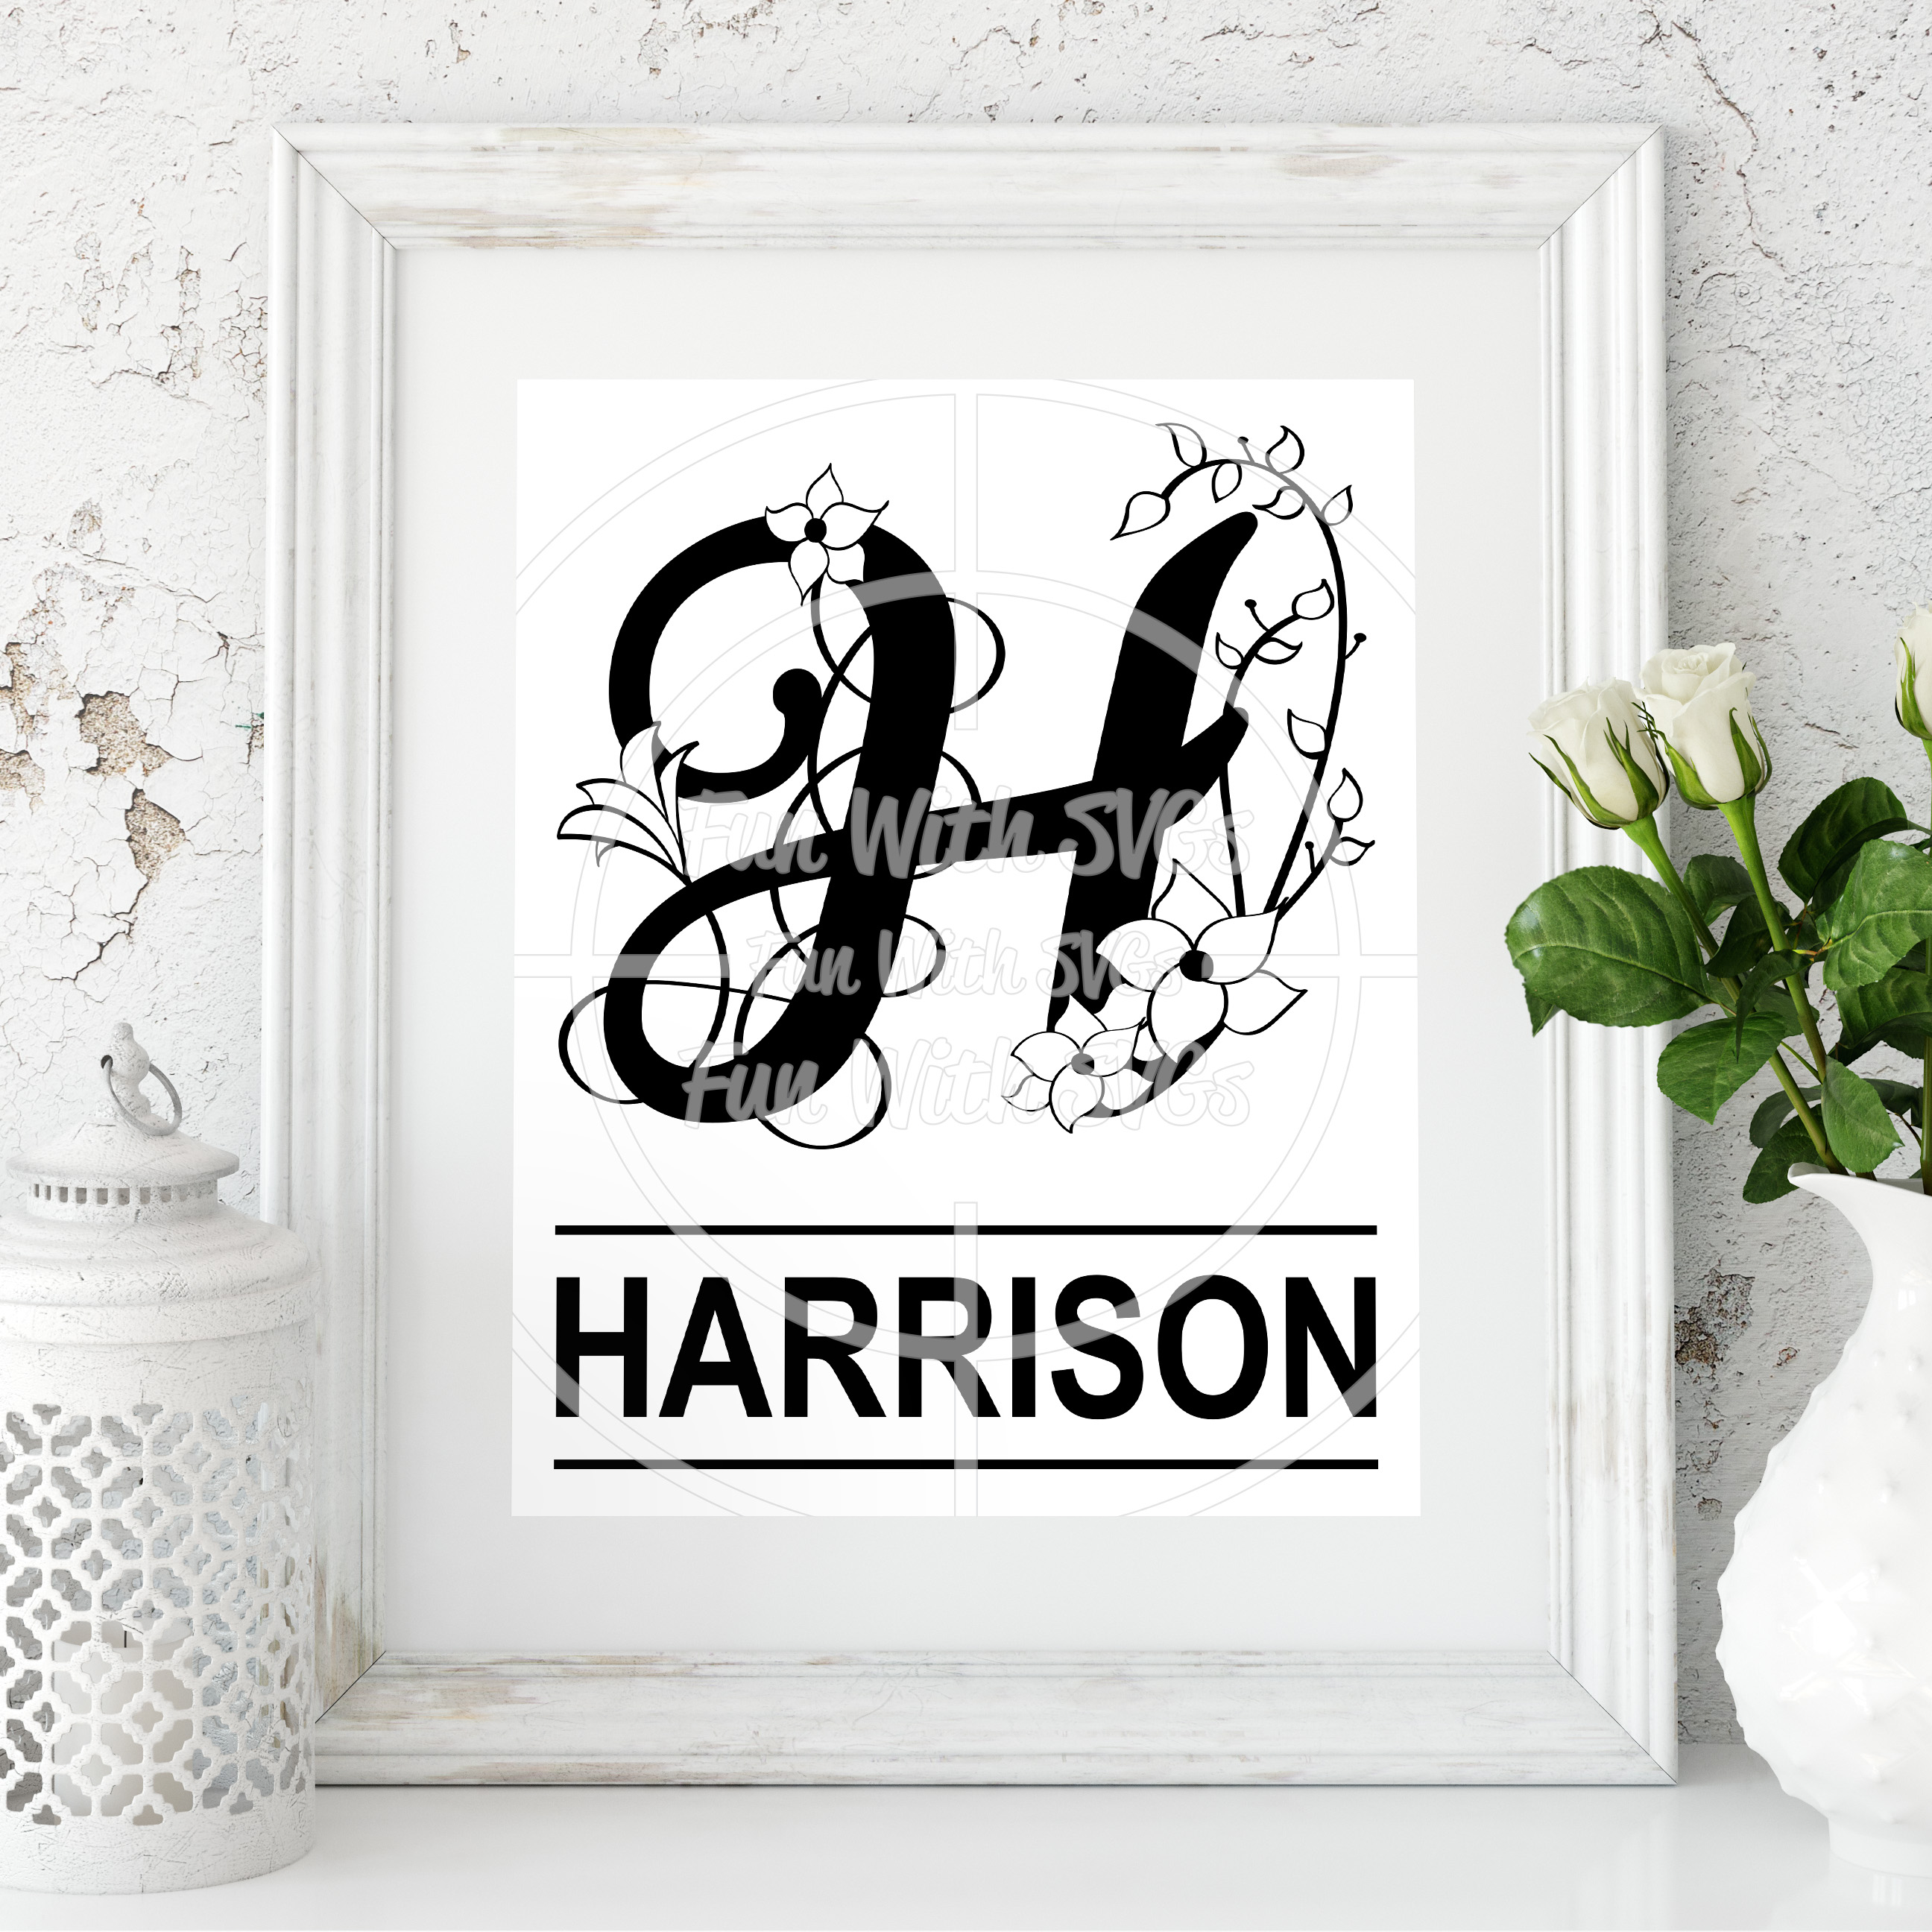 Letter H Monogram SVG Cut File ~ Fun With SVGs